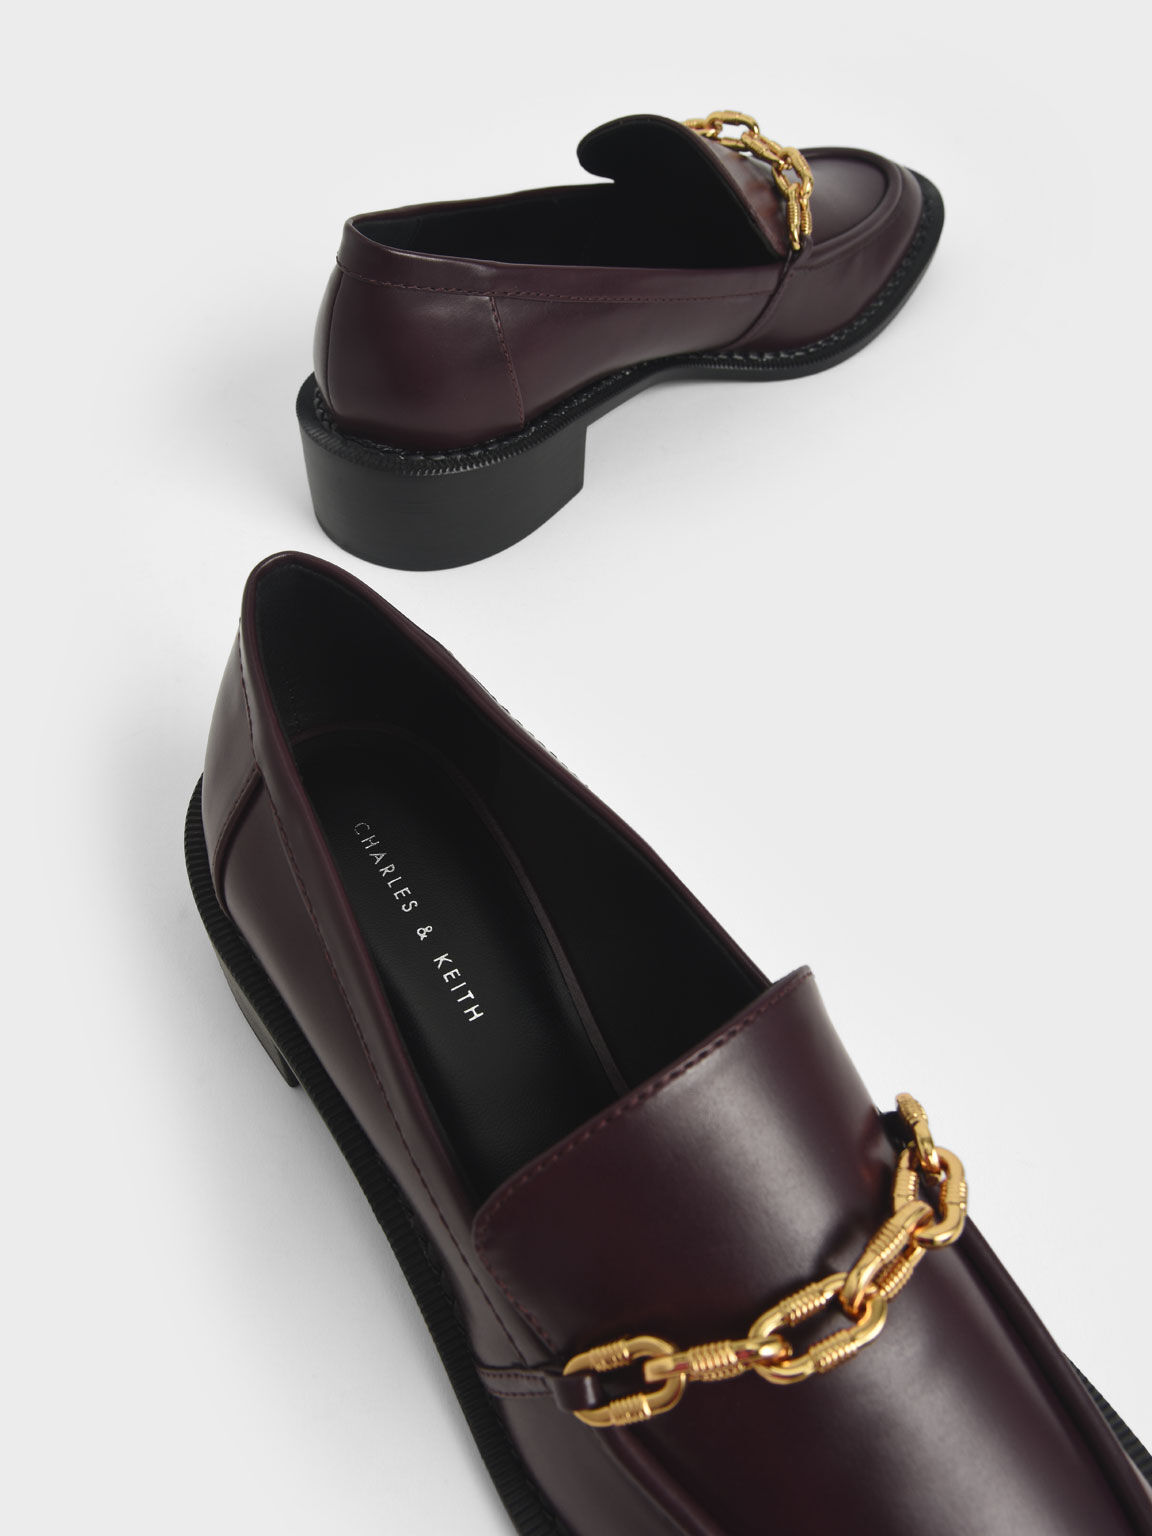 Chunky Chain Link Loafers, Burgundy, hi-res